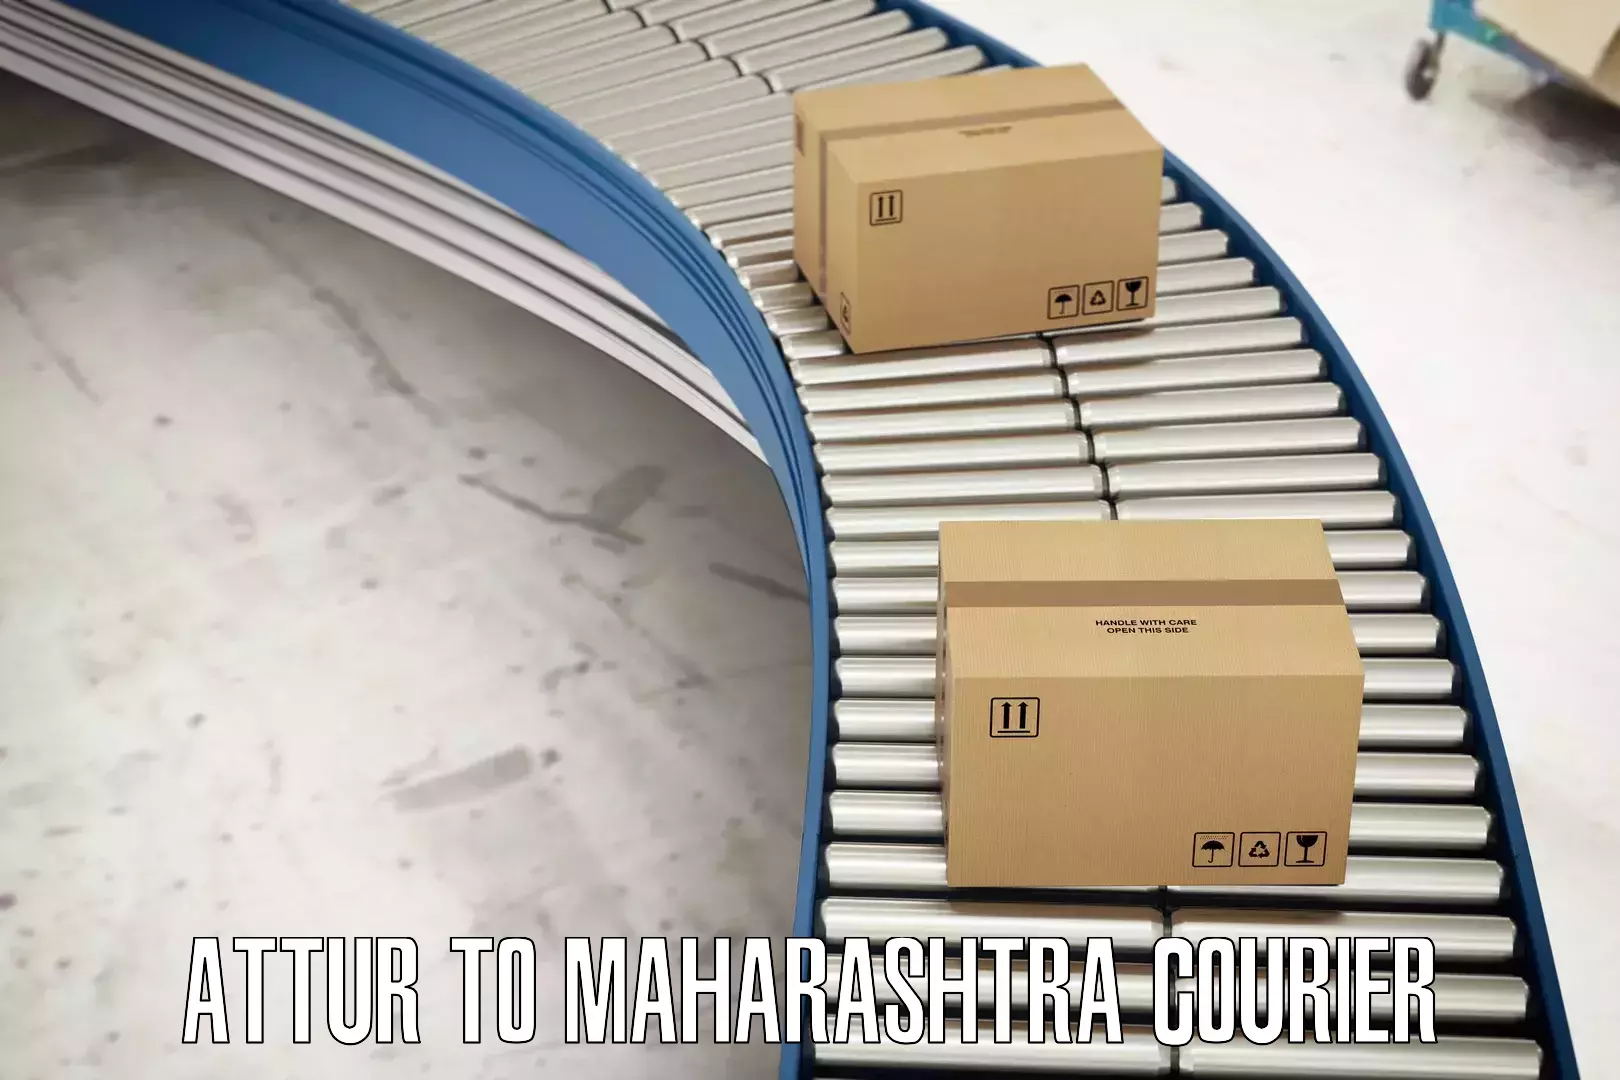 Global courier networks Attur to Wai